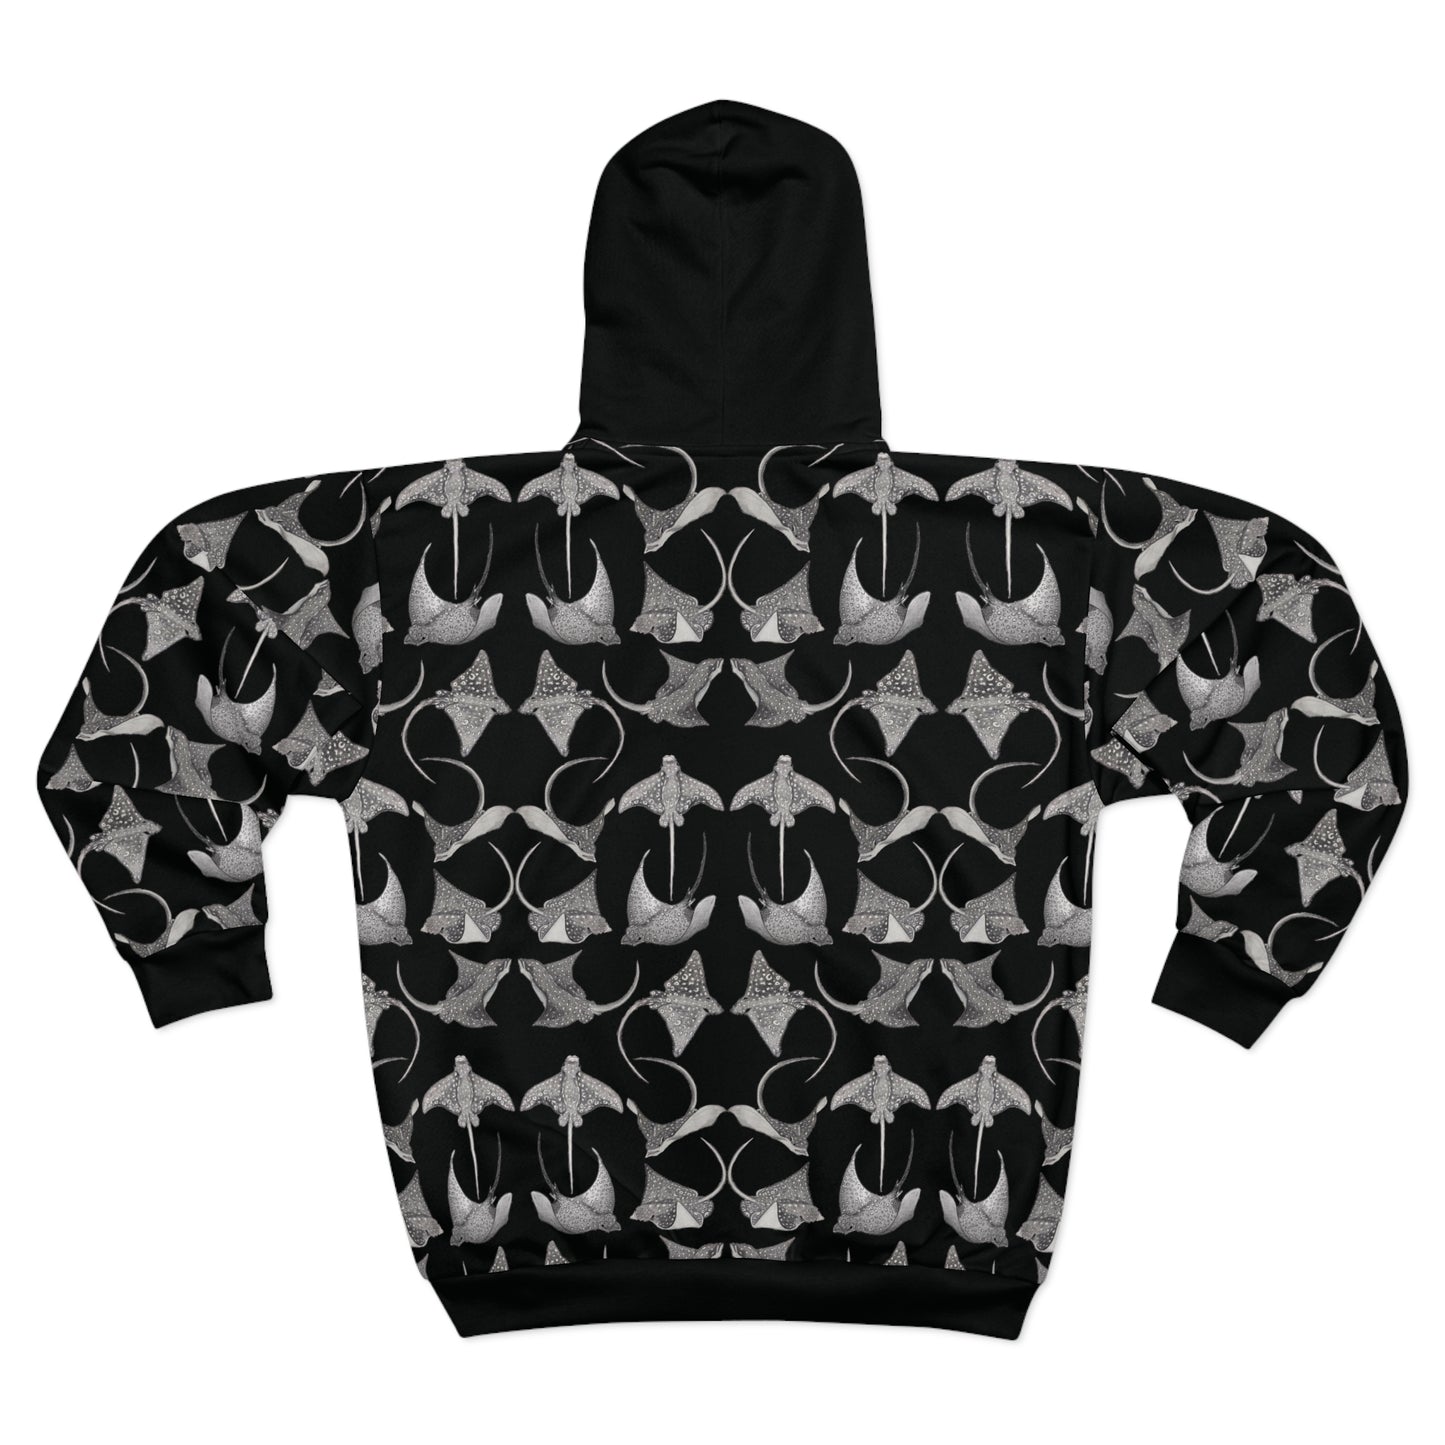 Eagle Ray - Limited Edition Unisex Zip Hoodie - Black